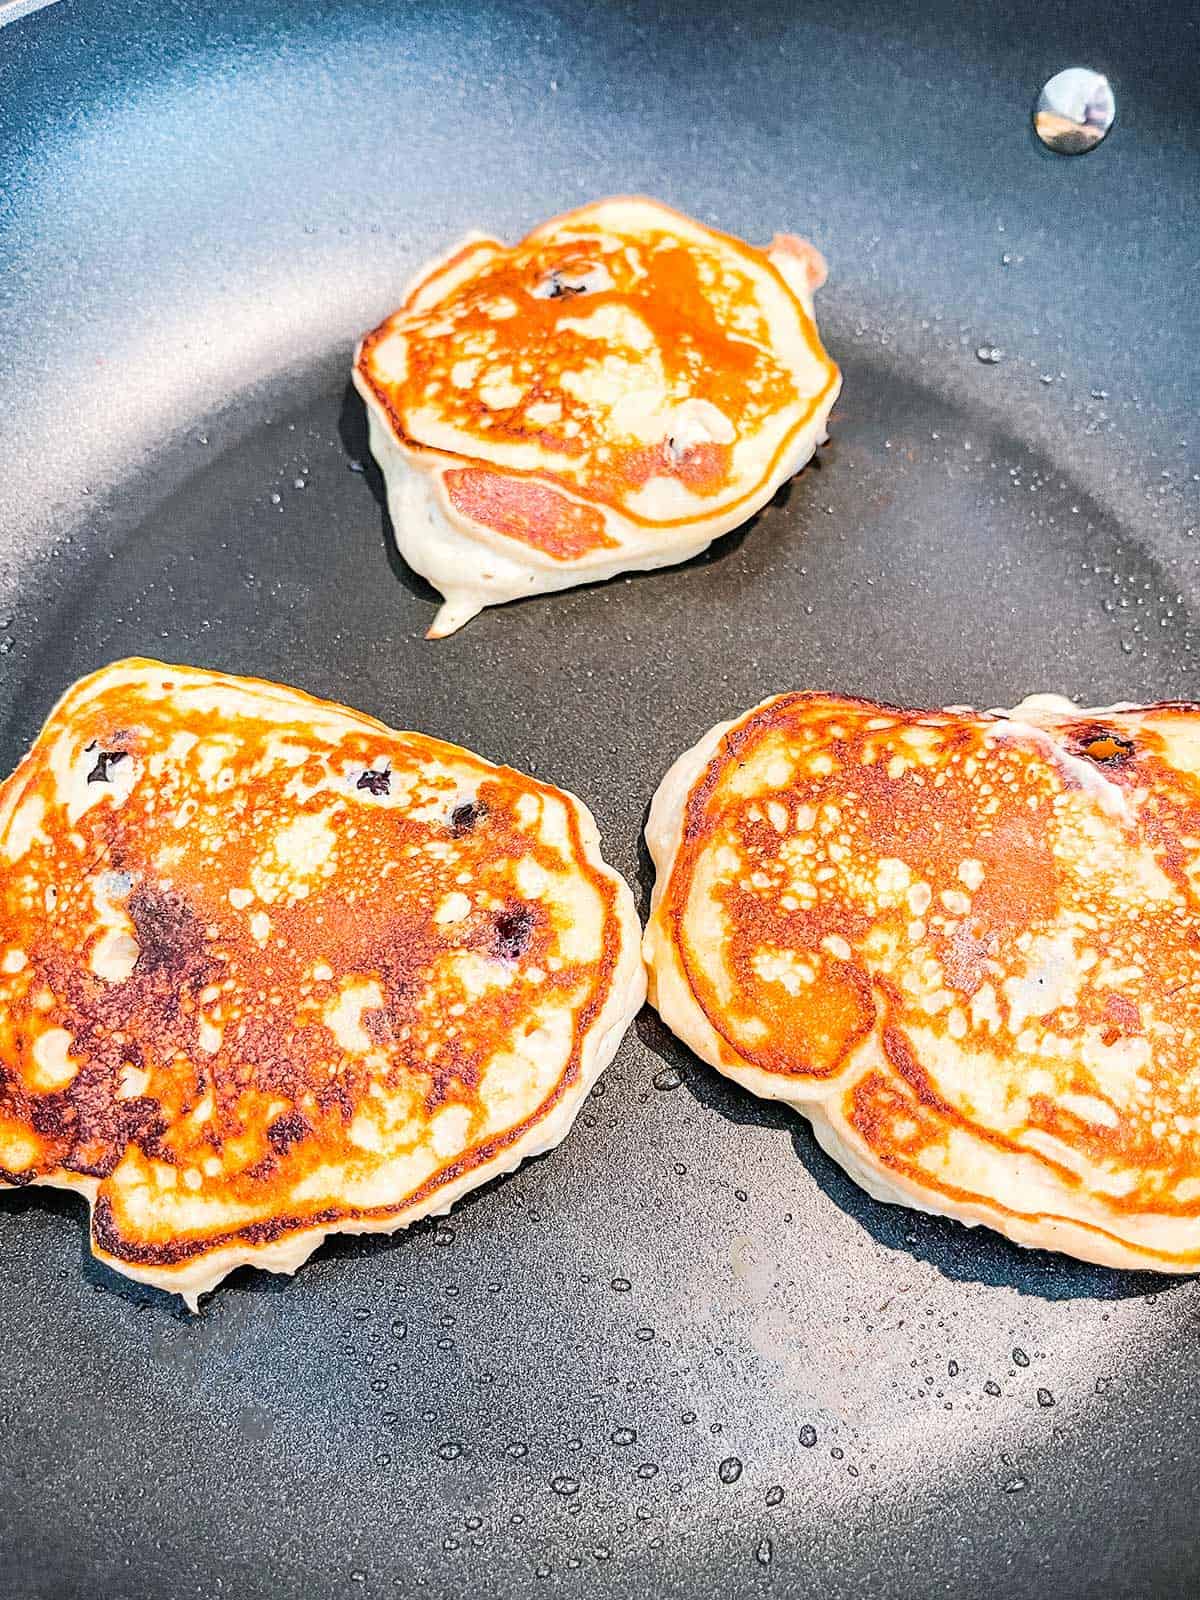 Three pancakes cooking in a skillet.